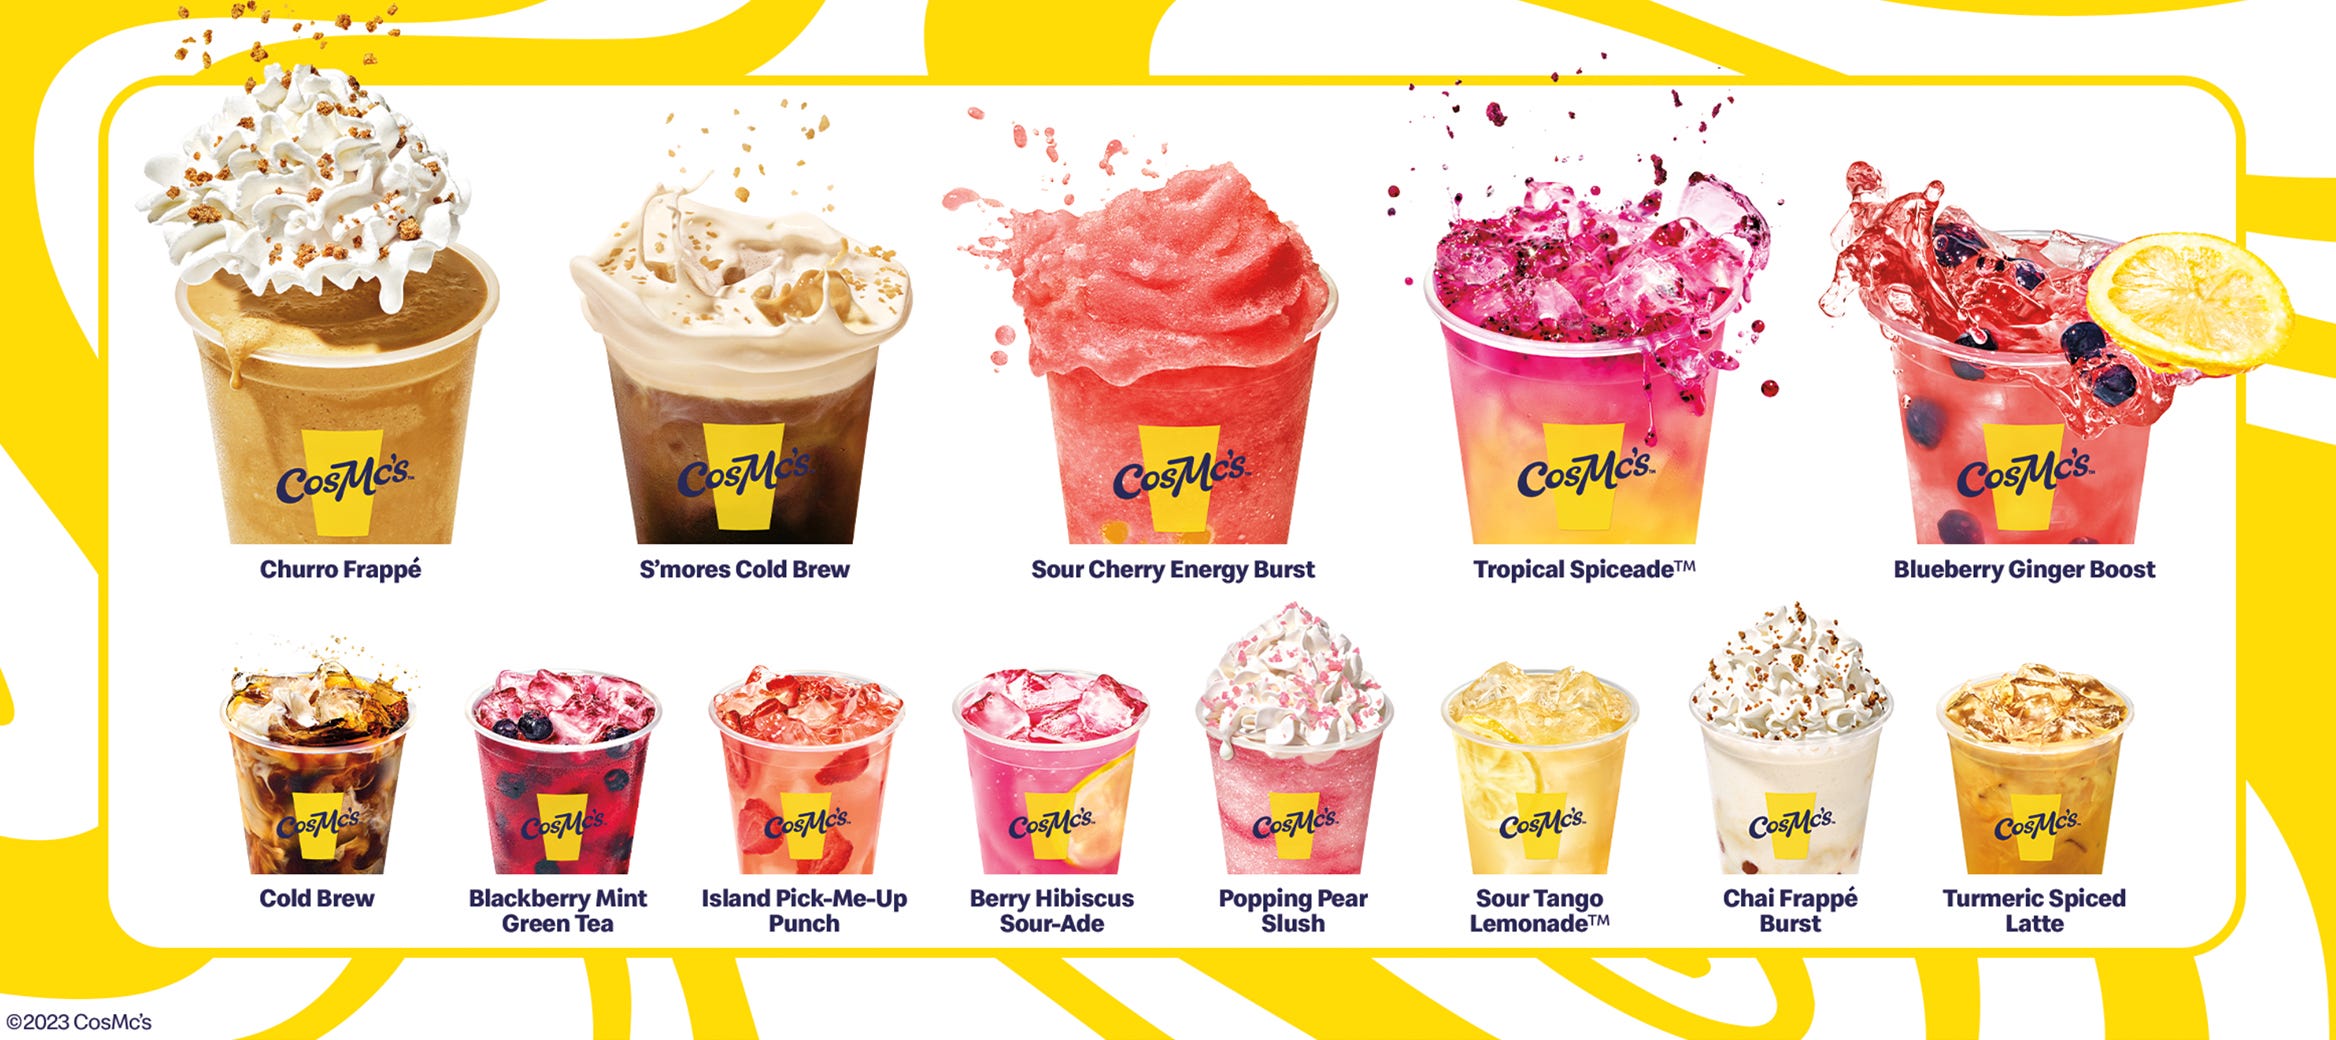 mcdonald's unveiled the menu for cosmc's, a beverage-focused concept that could compete with starbucks